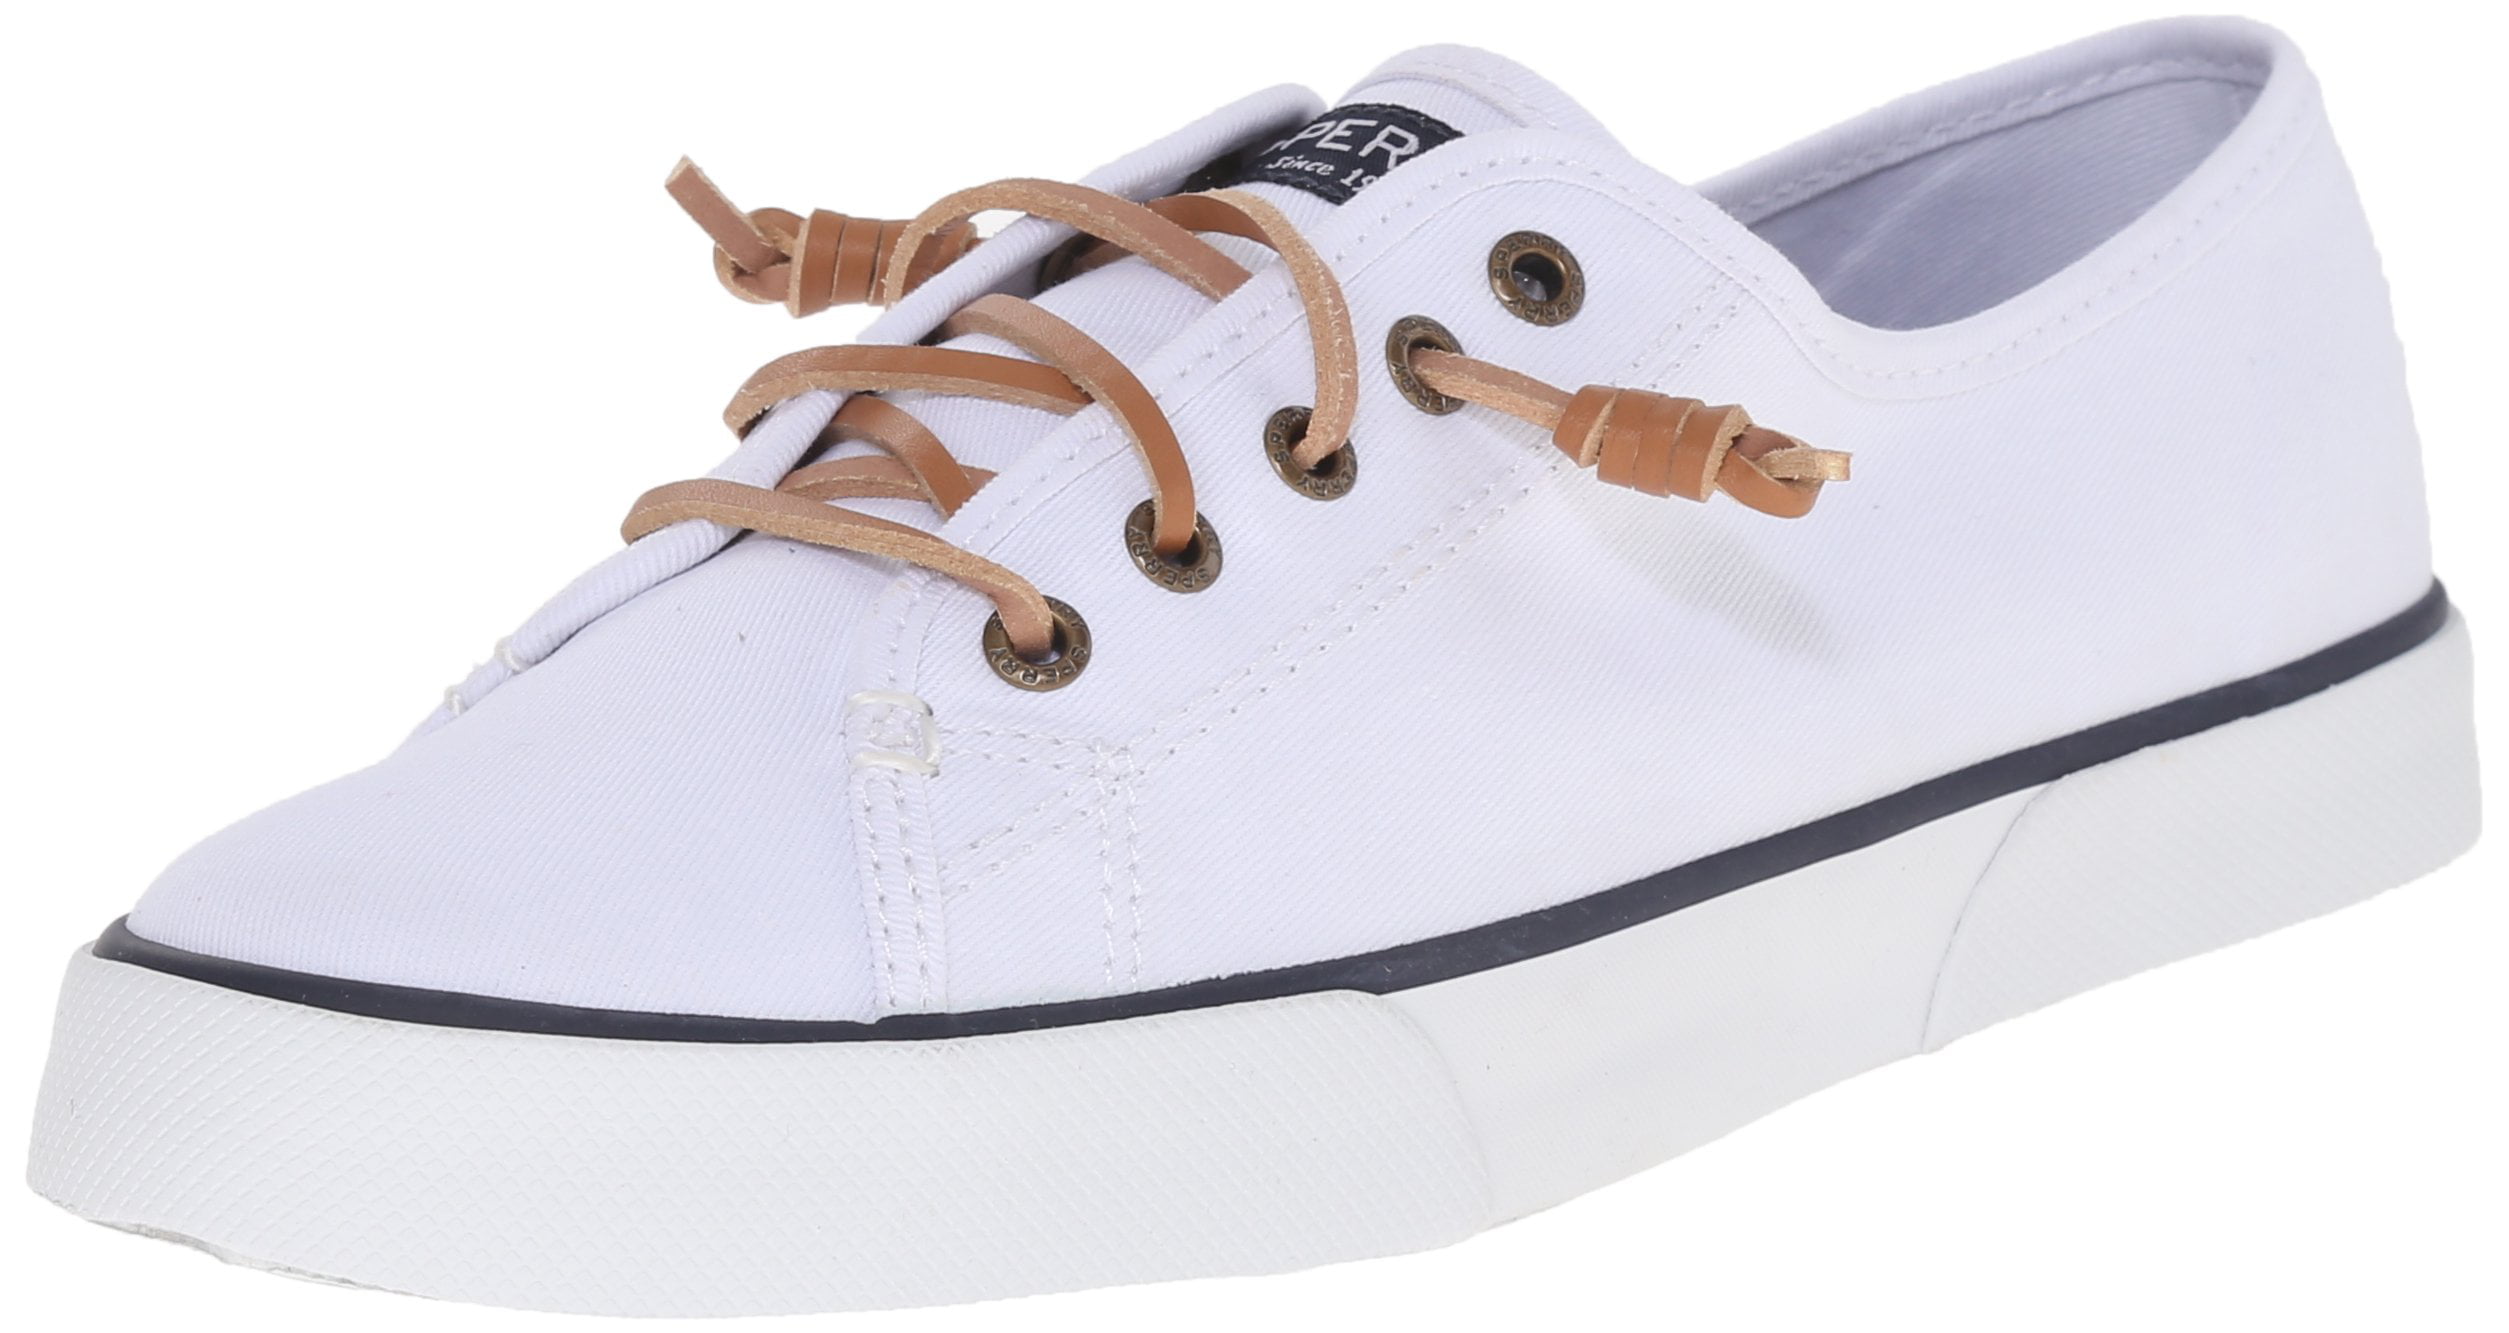 SPERRY Womens Pier View Nubuck Casual Sneakers,